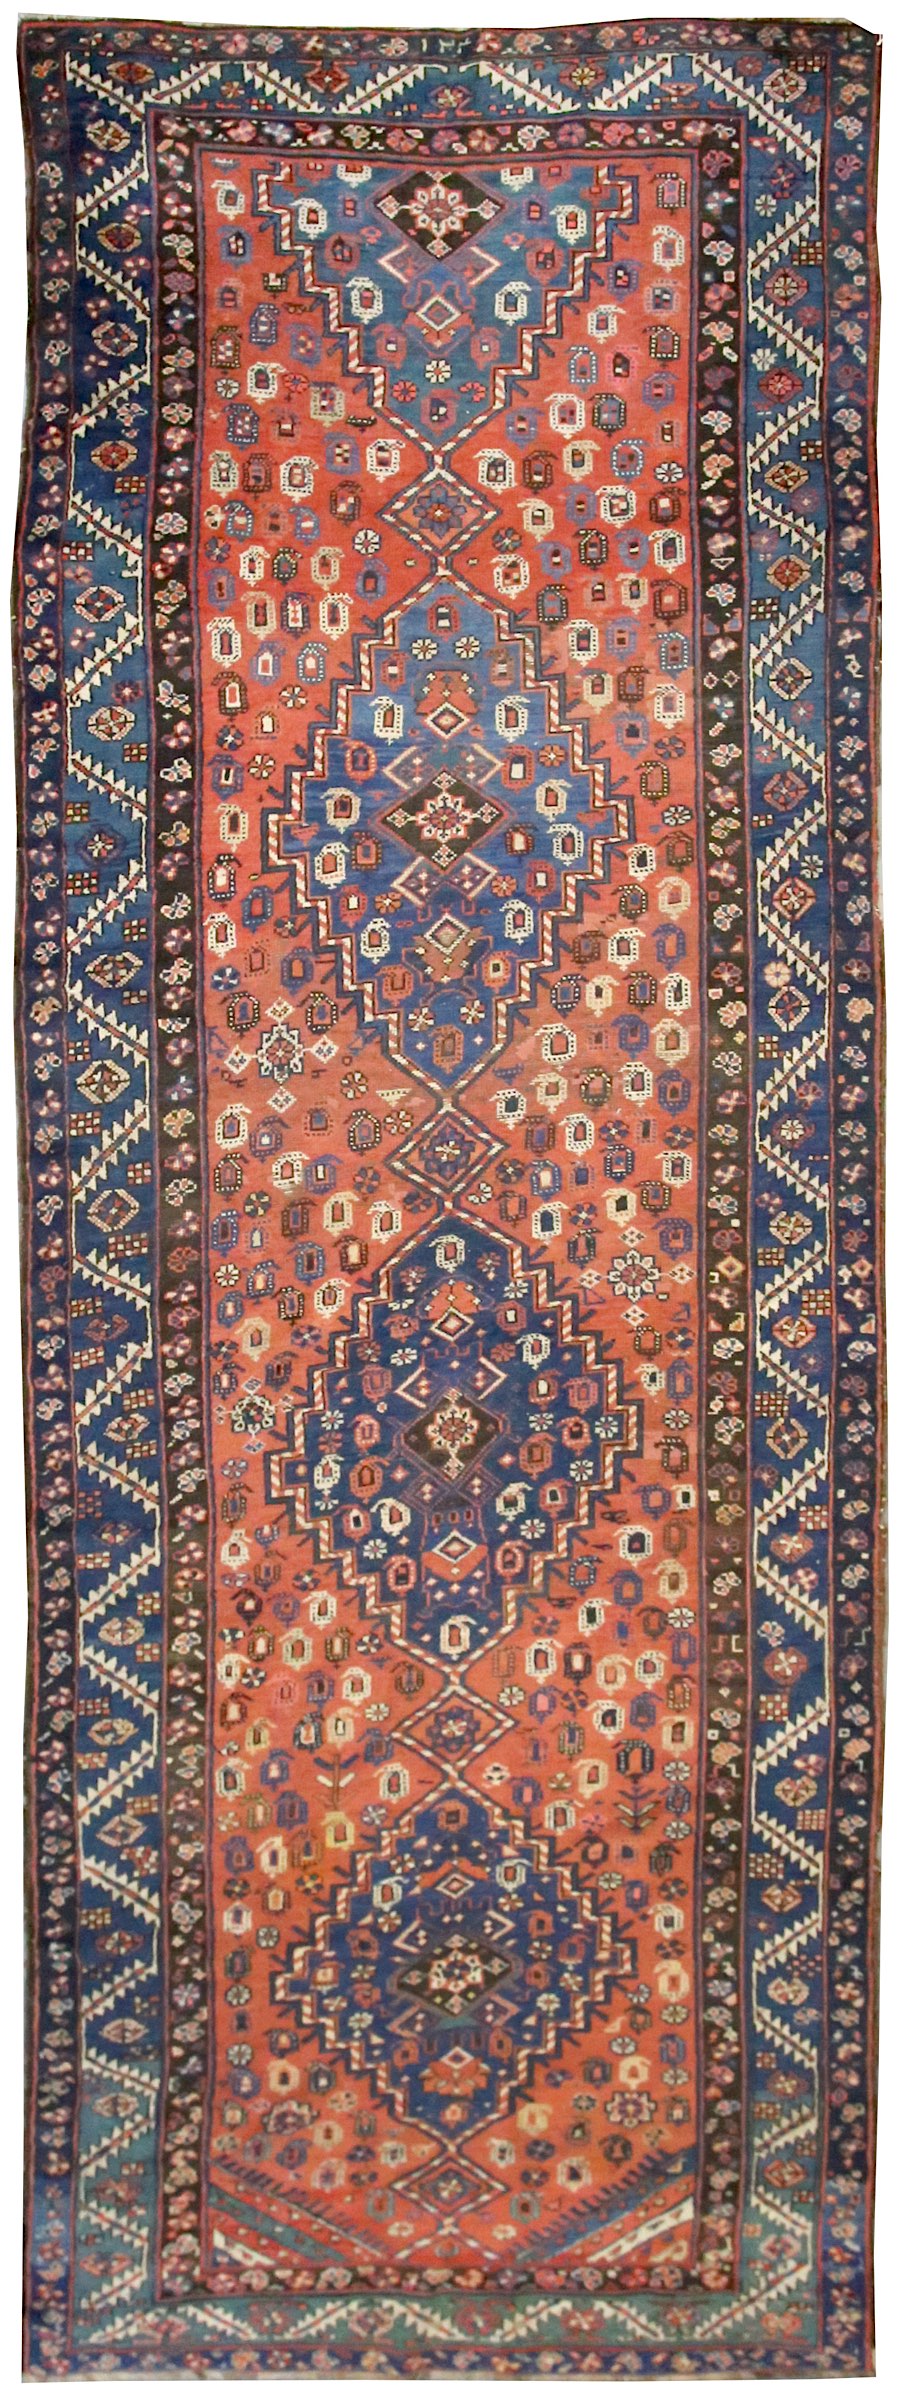 An antique Hamseh rug, Southwest Persia, the field with overall design of hooked and serrated